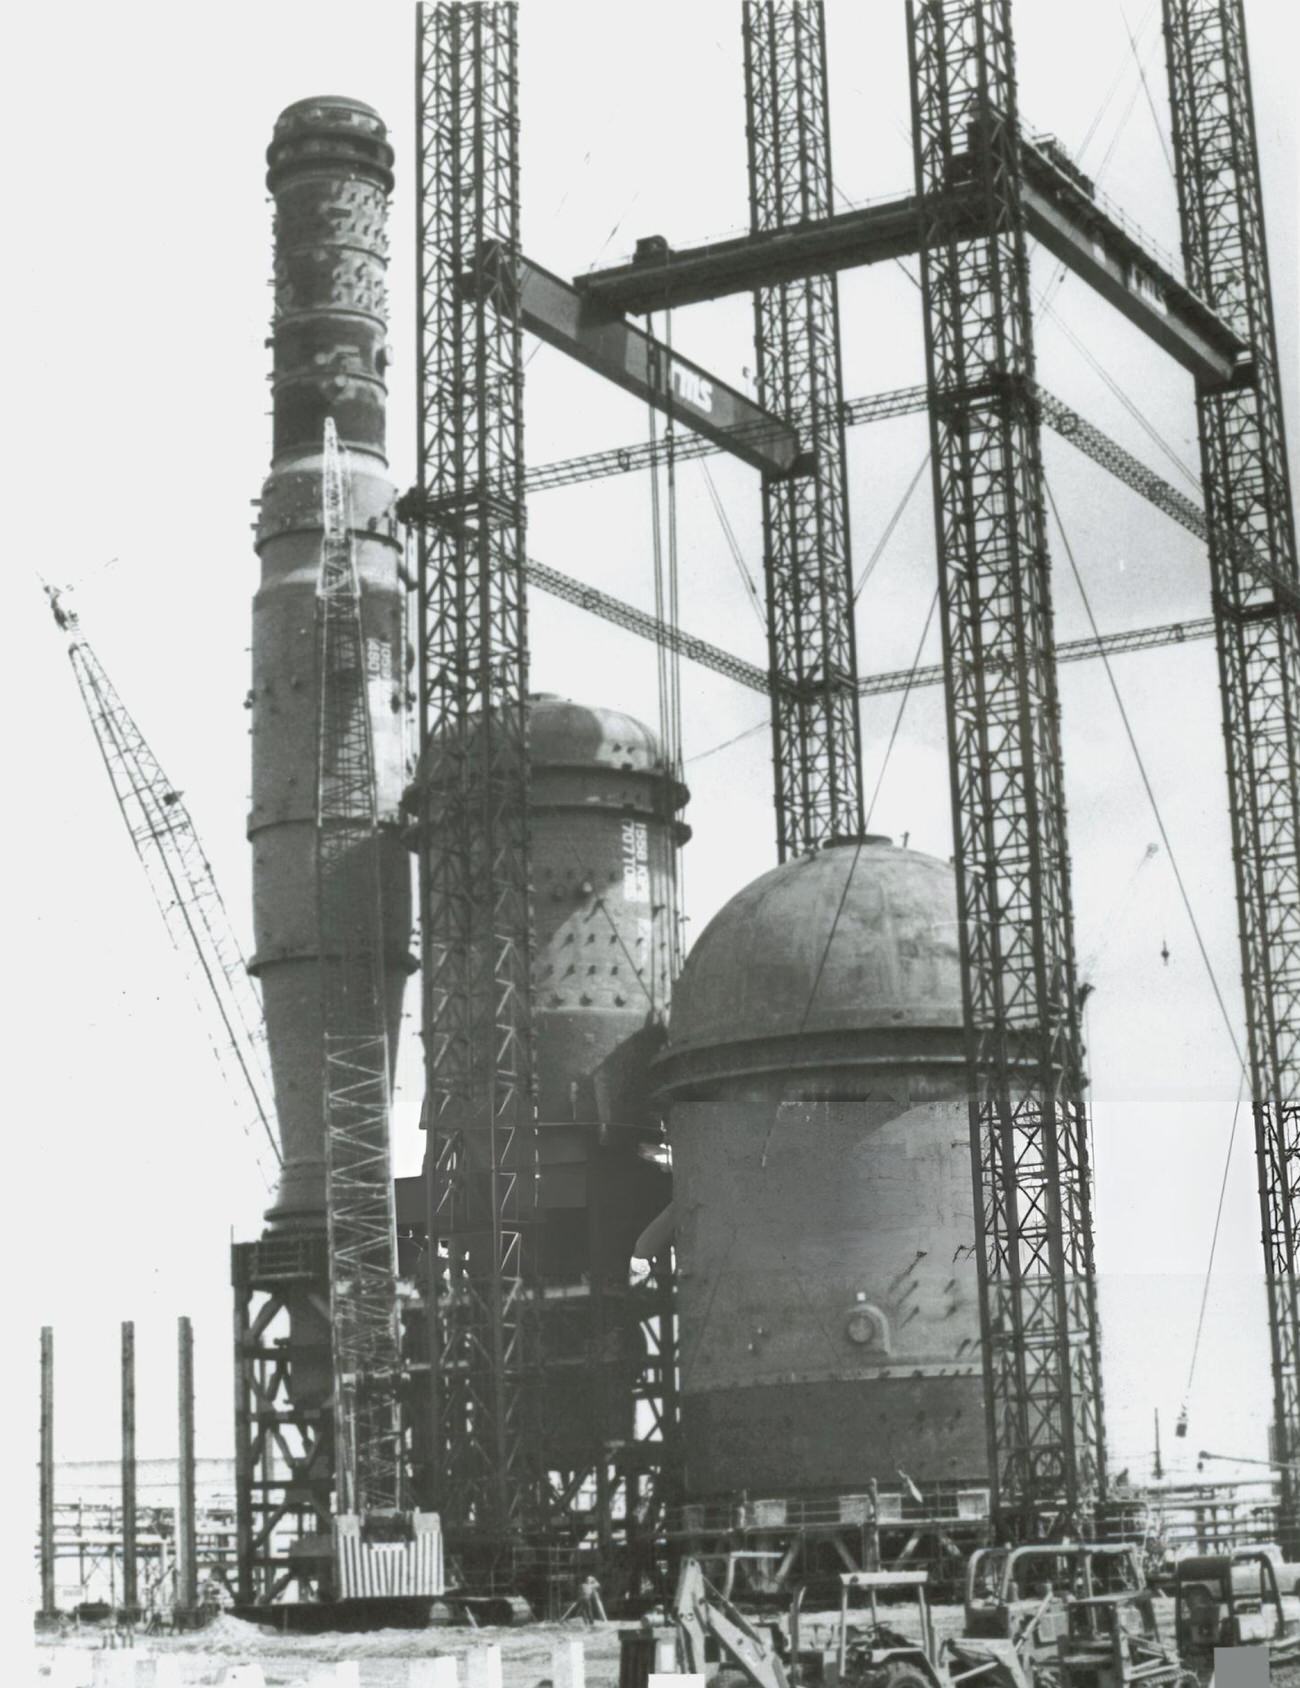 Three domed vessels are installed at Exxon Company USA's Baytown refinery, part of an upgrade project to process crude oil more efficiently, Houston, Texas, 1987.